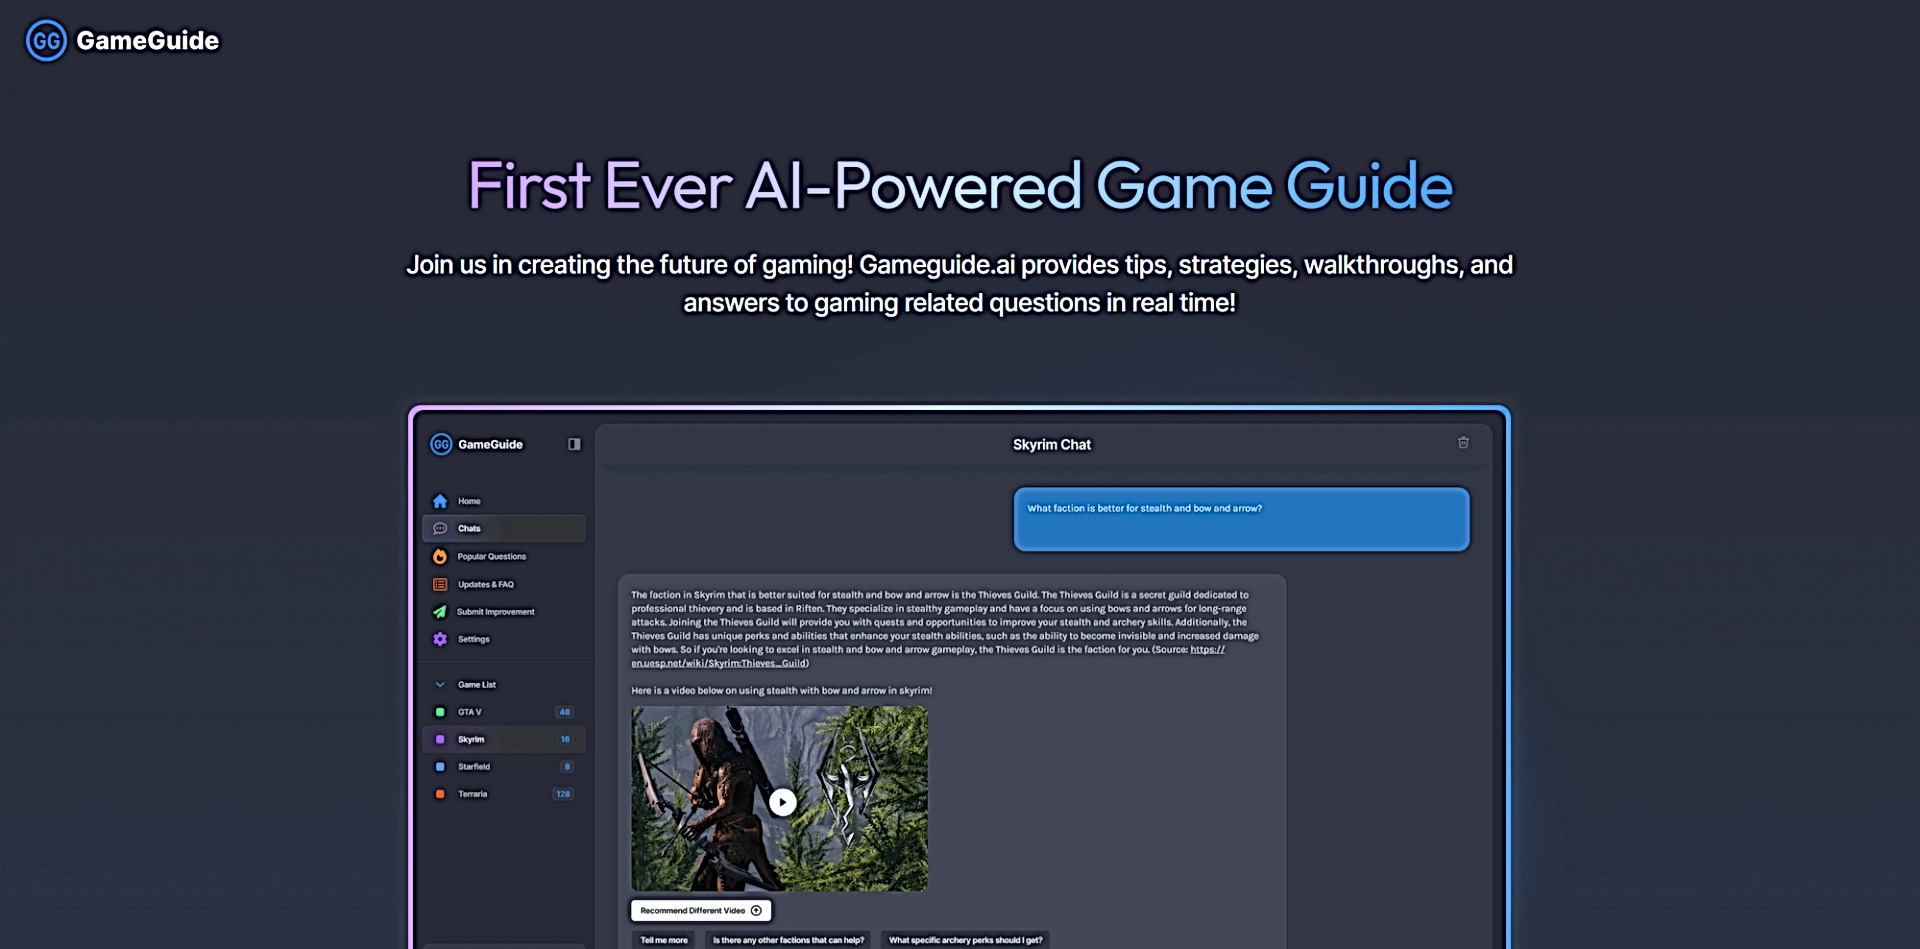 GameGuide featured